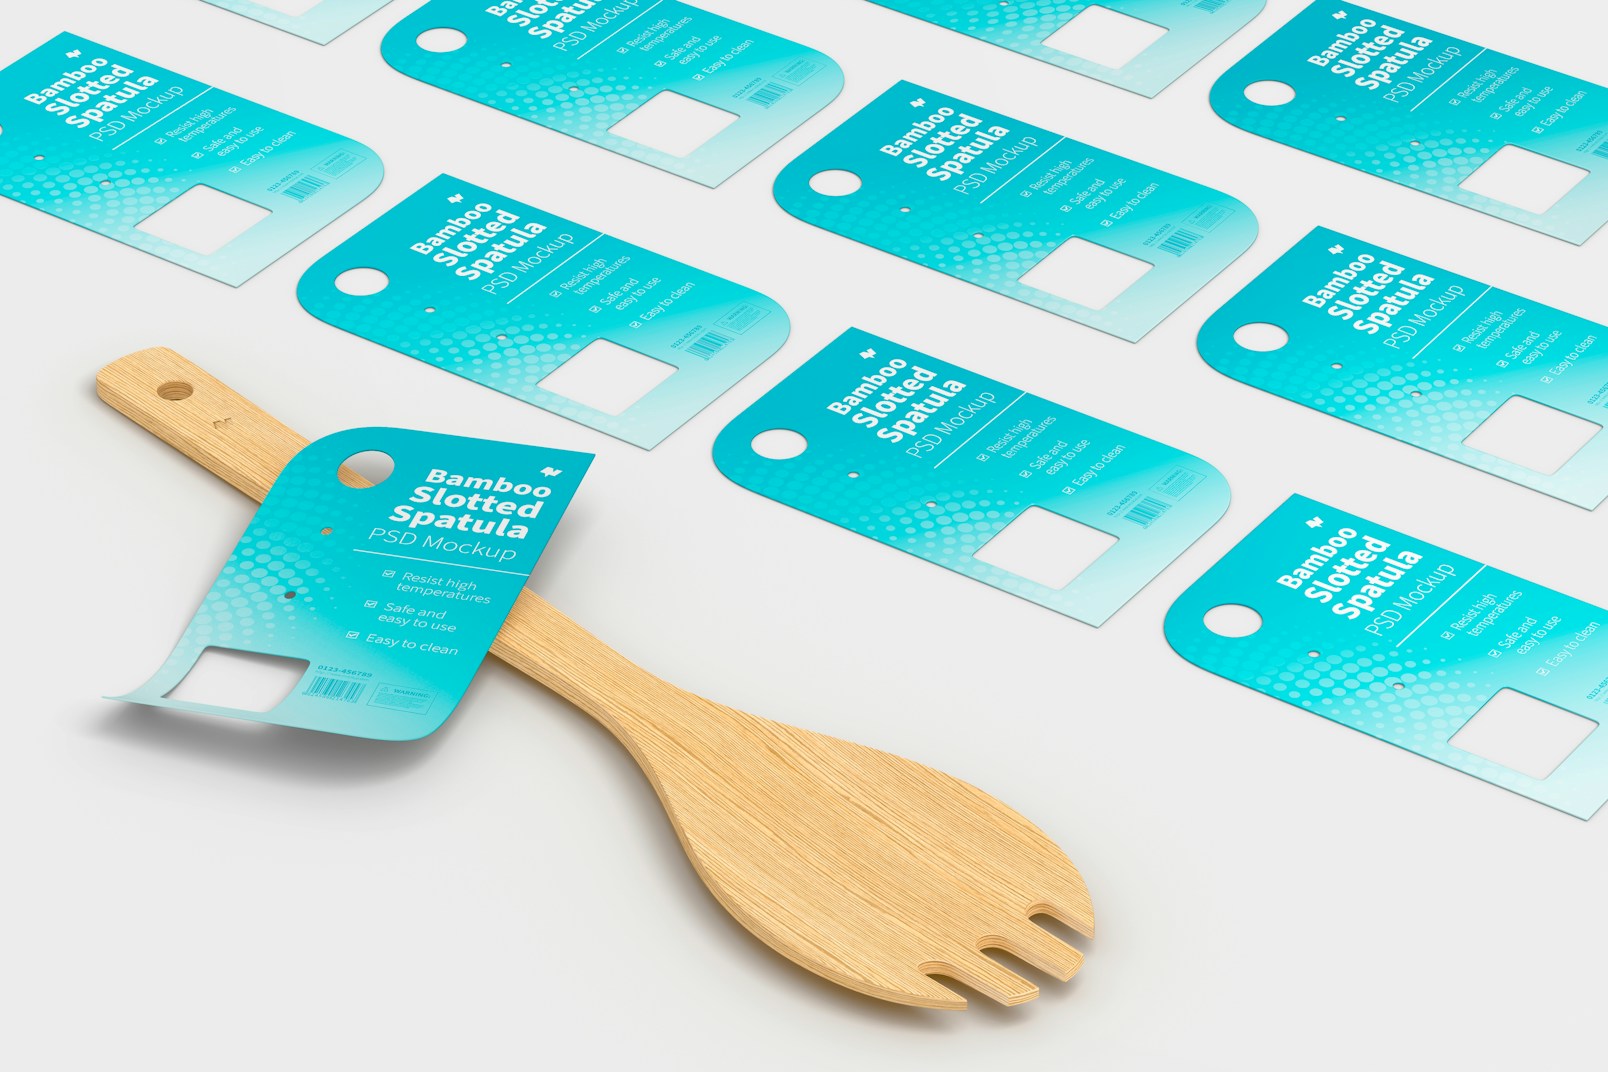 Bamboo Slotted Spatula with Labels Mockup